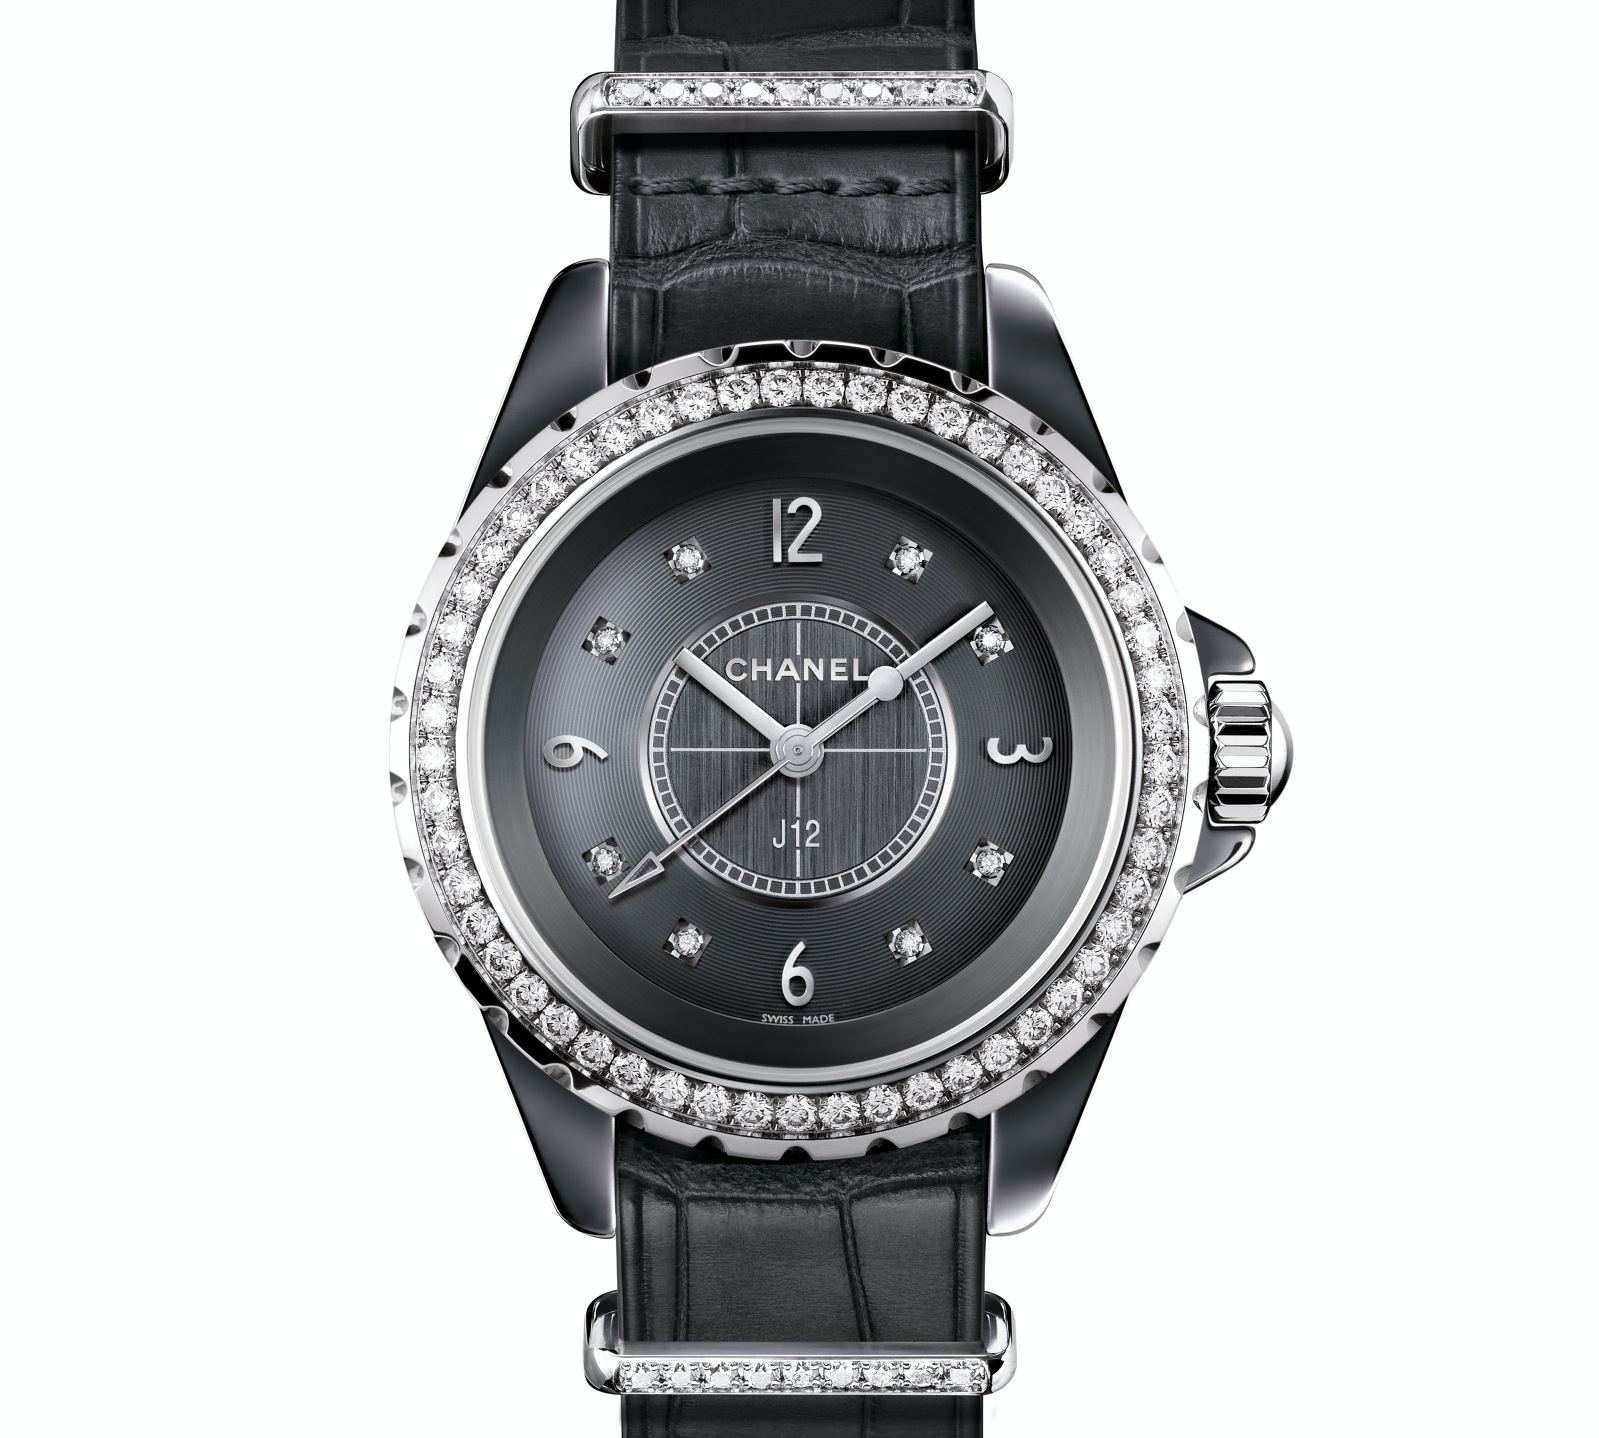 Introducing The Chanel J12-G10, Equipped With An Alligator And